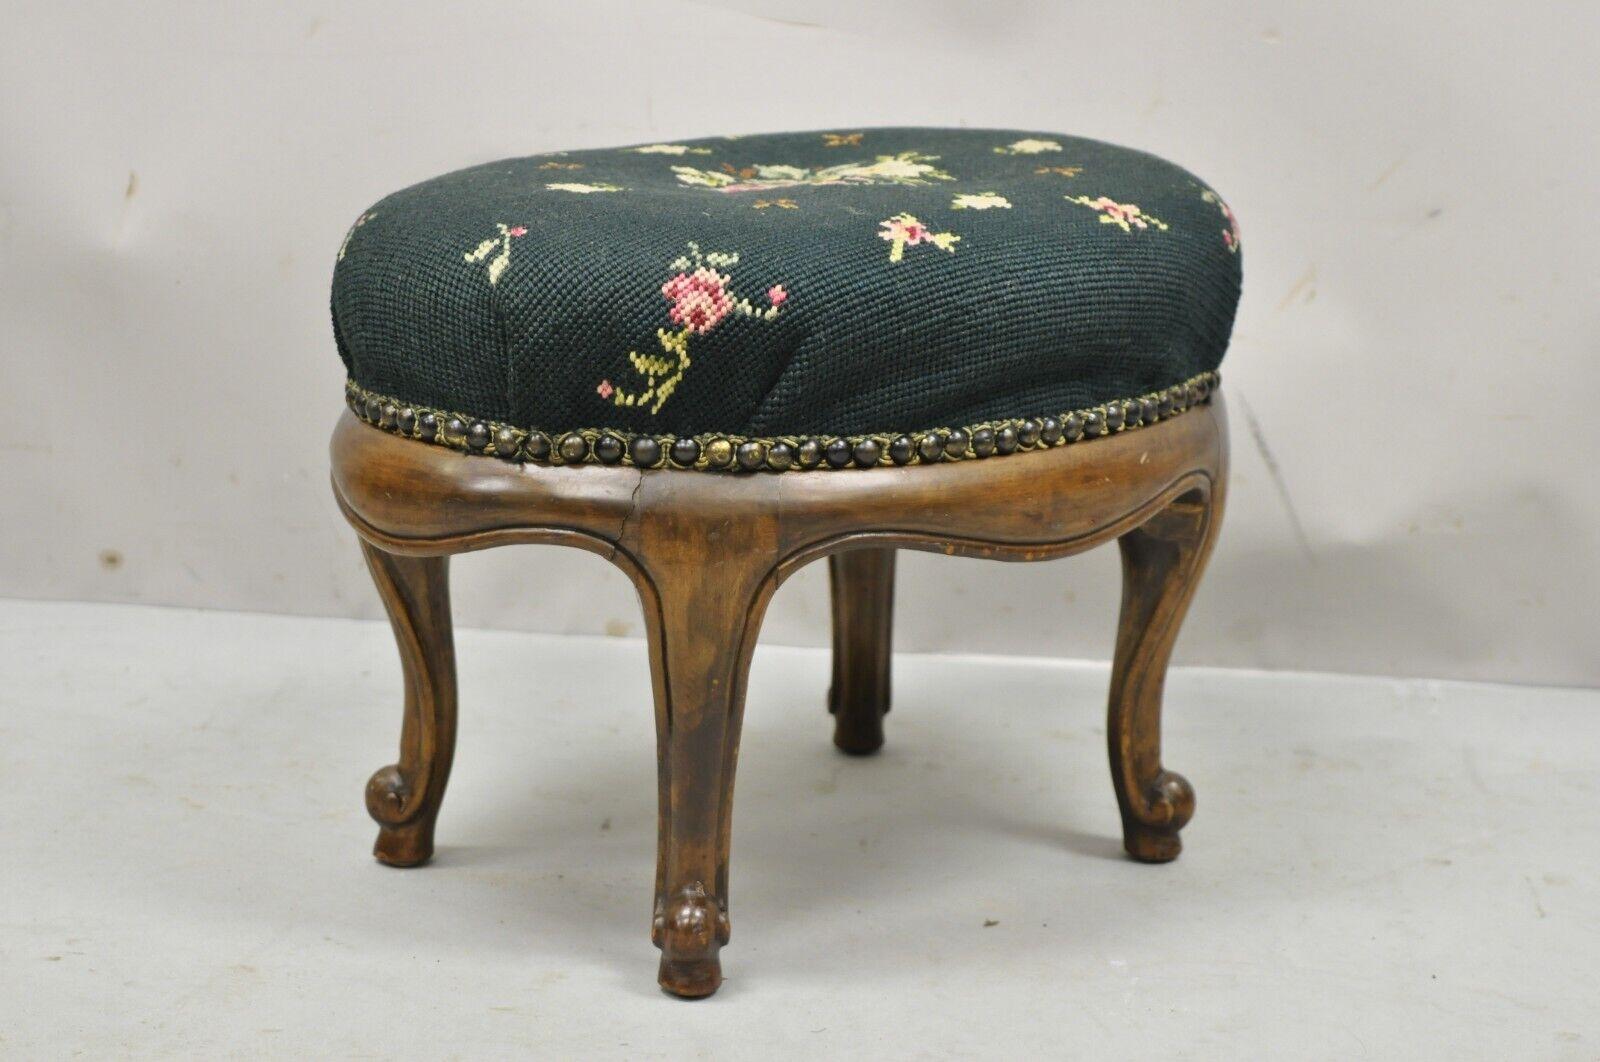 Antique French Victorian green floral needlepoint oval mahogany small footstool ottoman. Item features green floral needlepoint upholstery, nice oval shape, solid wood frame, beautiful wood grain, nicely carved details, cabriole legs, very nice